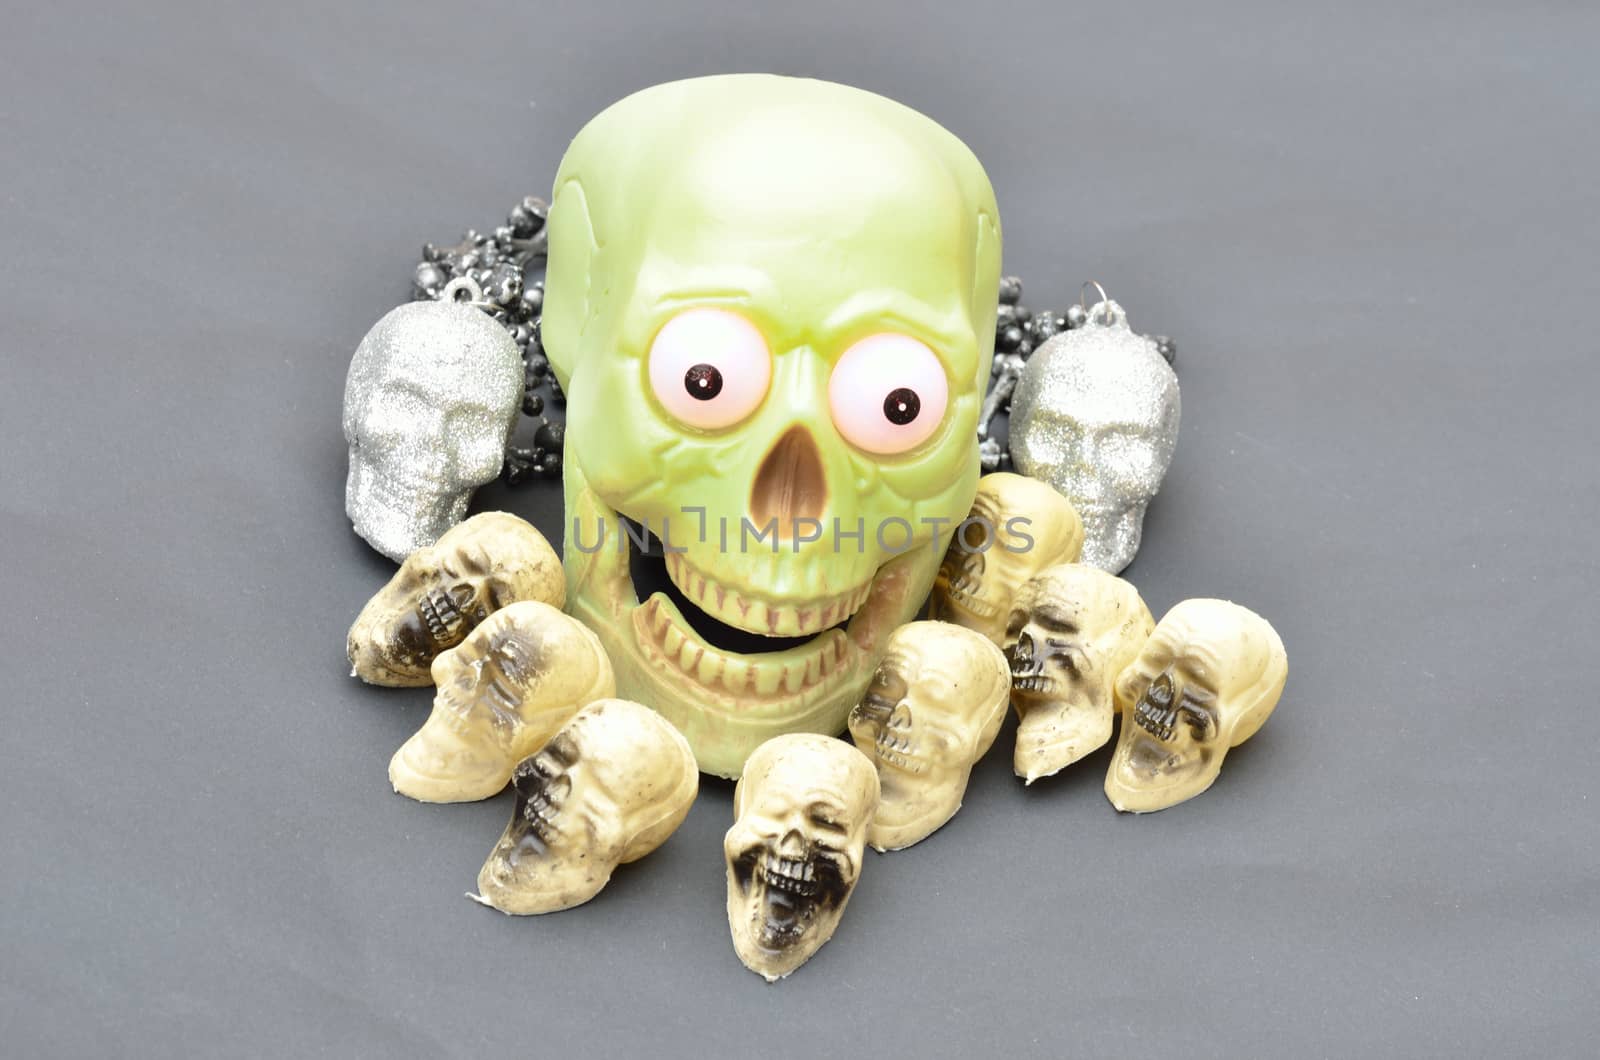 Big Skull surrounded by small Skulls